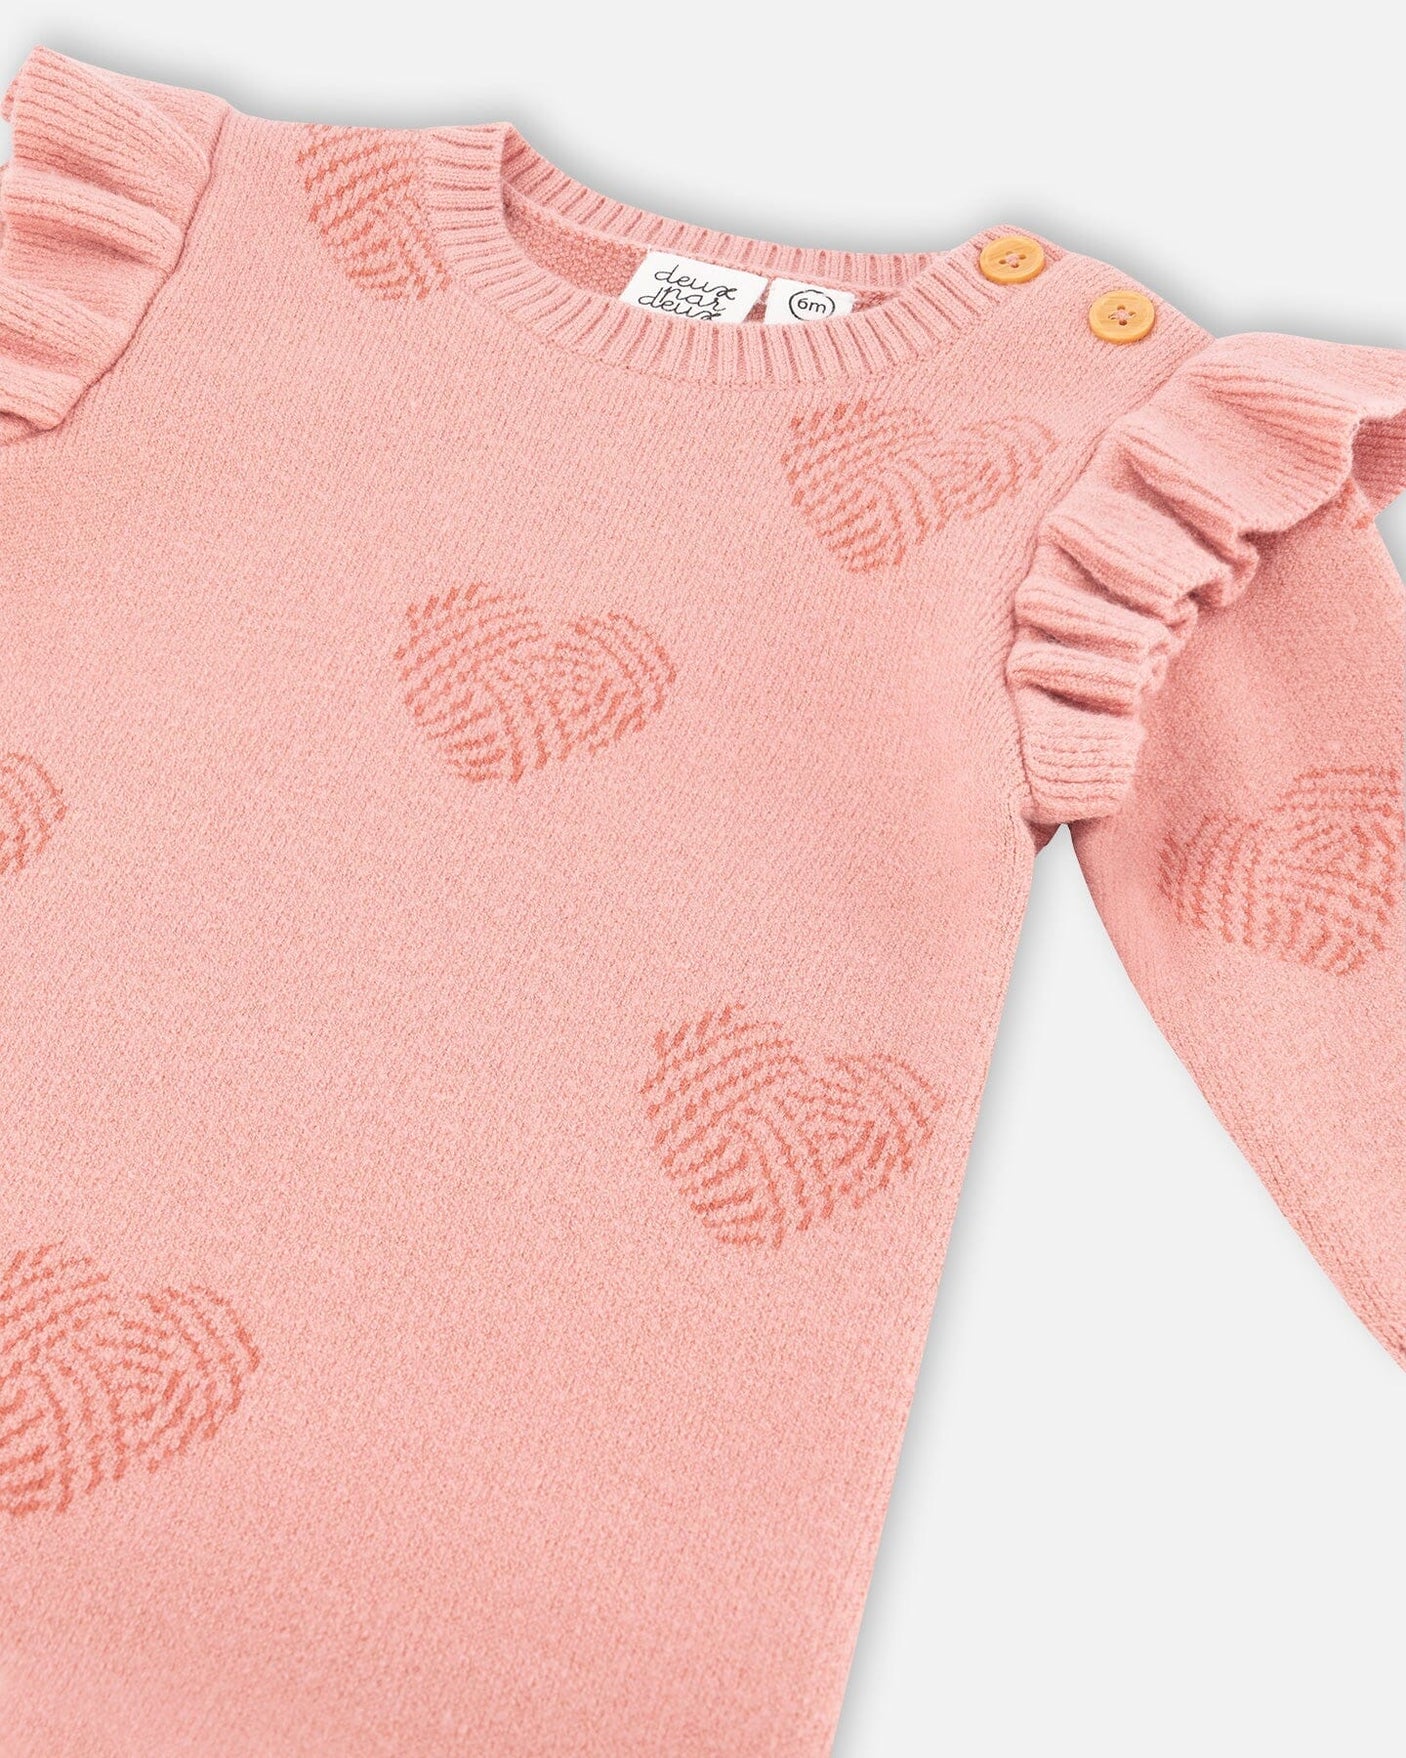 Knitted Jumpsuit With Jacquard Powder Pink Little Heart Of Wool-3